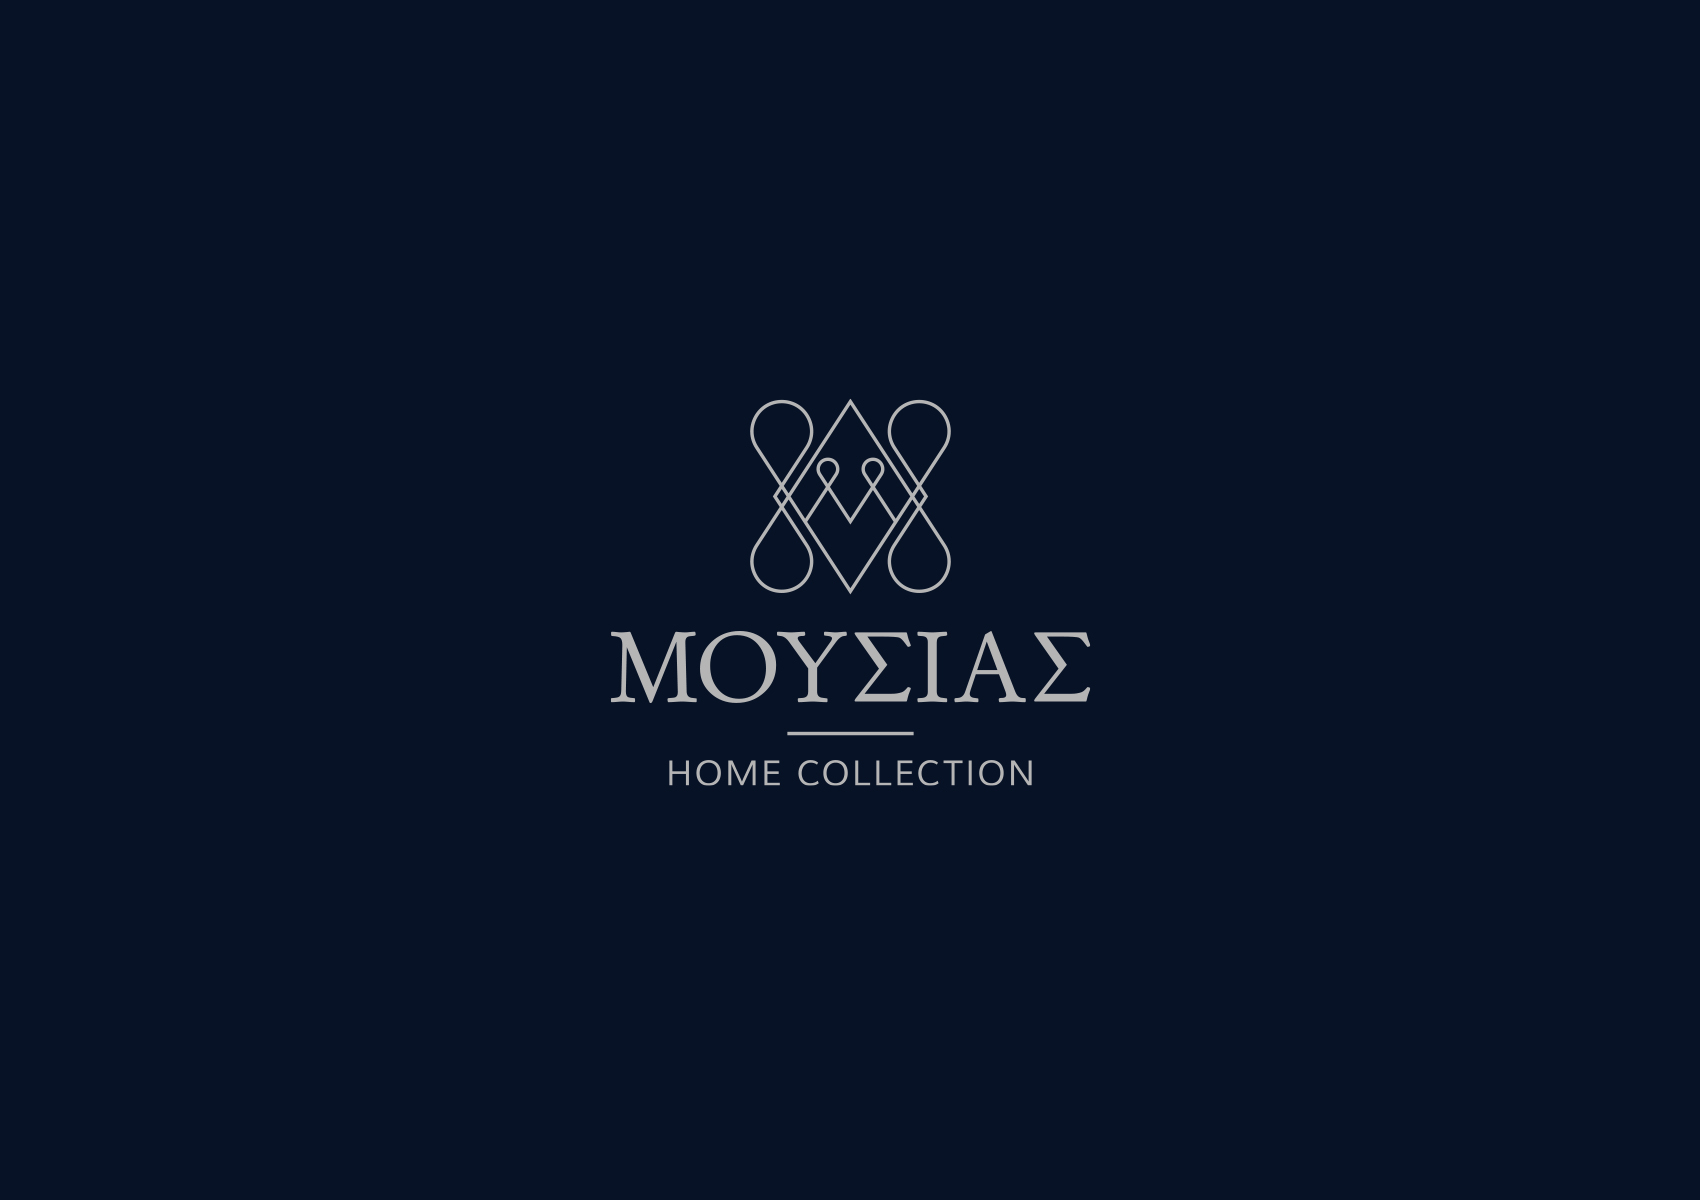 Moussias Home Collection logo 1700x1200 by xhristakis